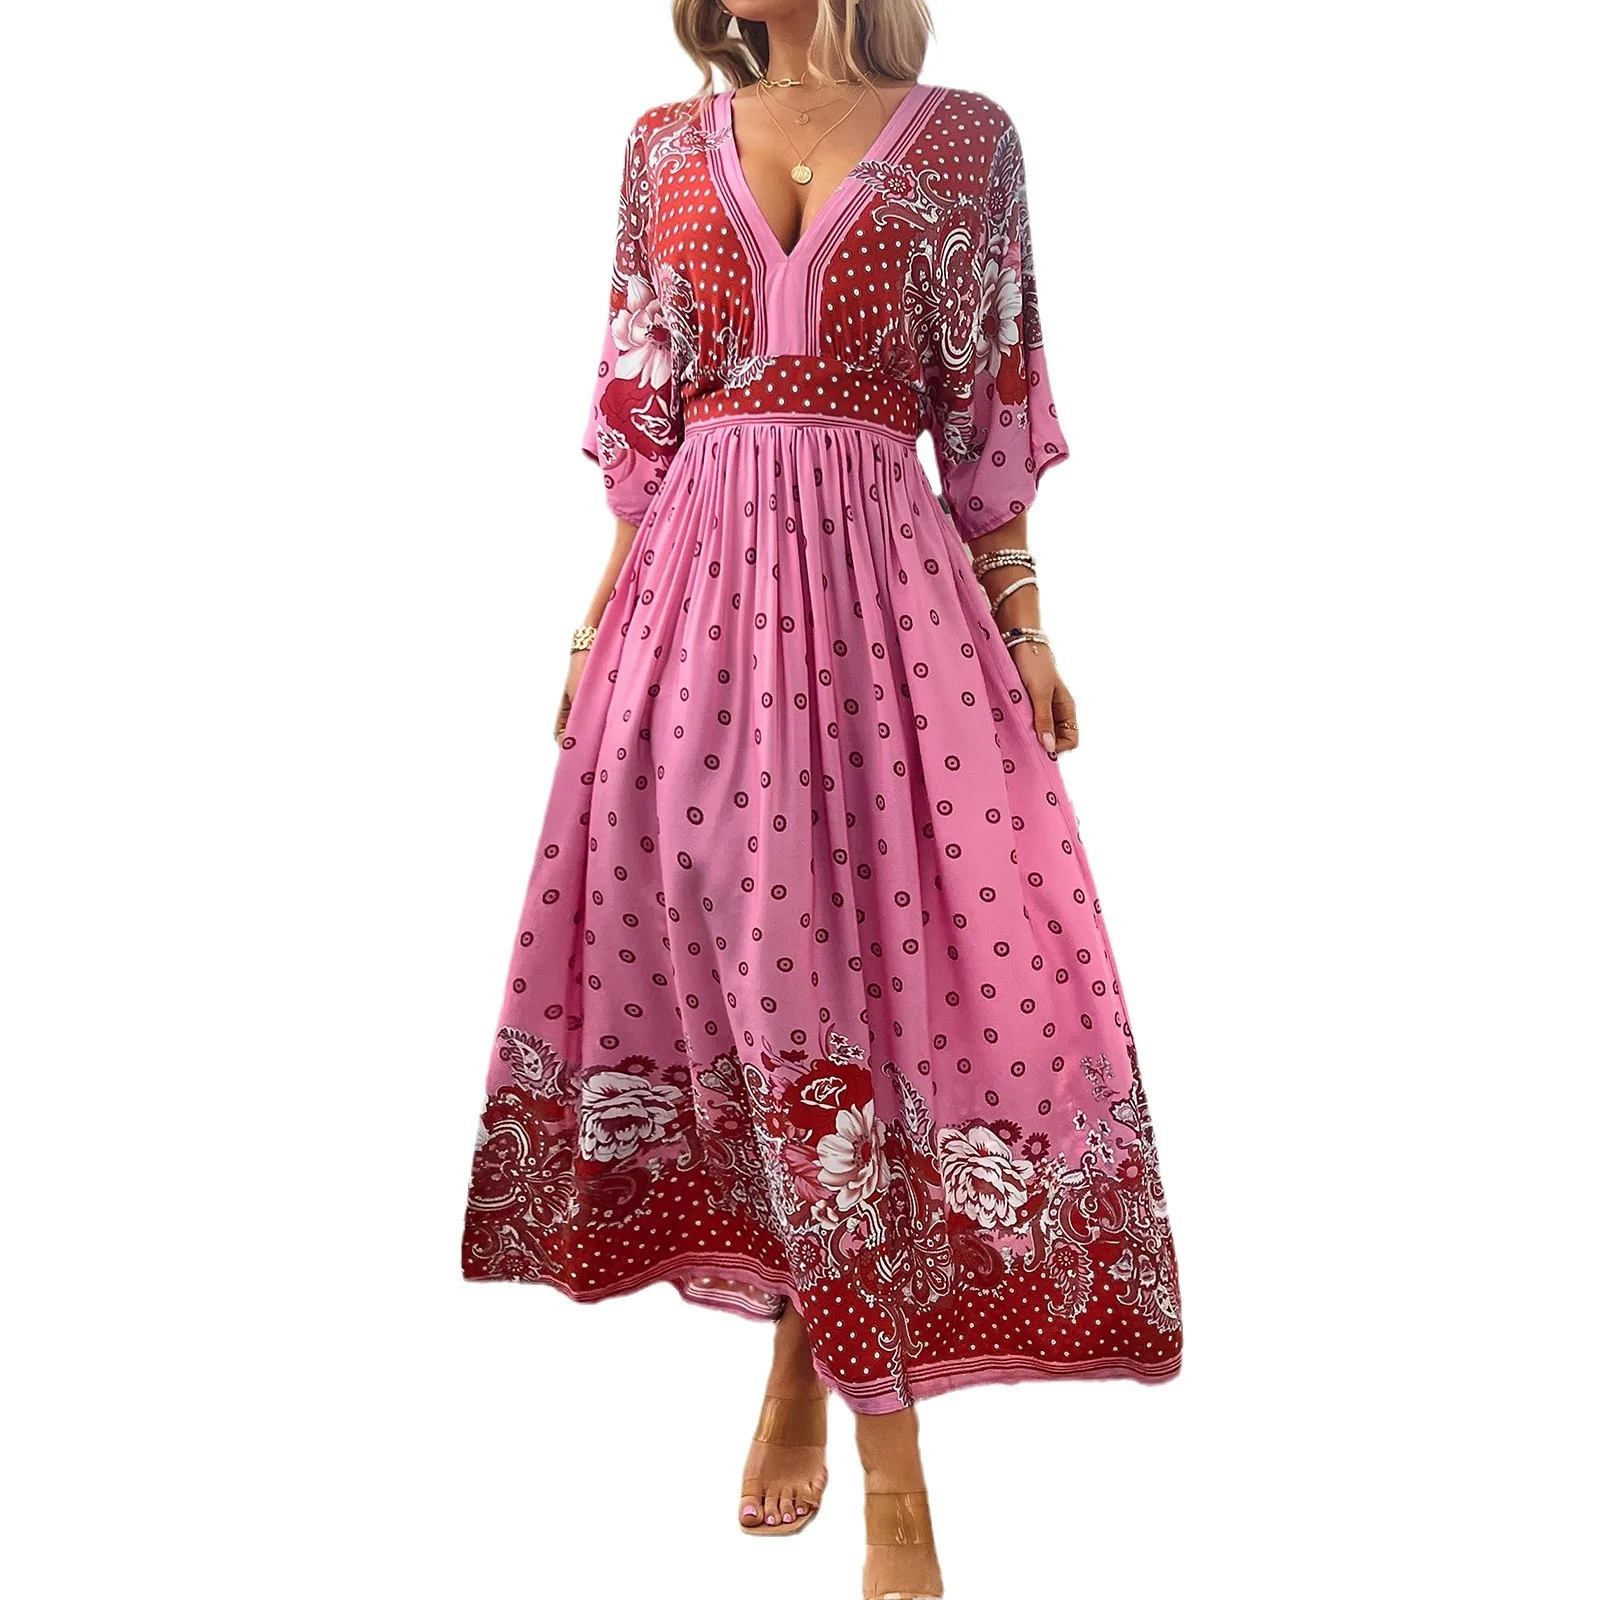 

YEAE Printed V-Neck Swing Long Floral Tribal Ethnic Half Sleeve Loose Belt Women's Dress Bohemian Style Vacation Holiday Dresses